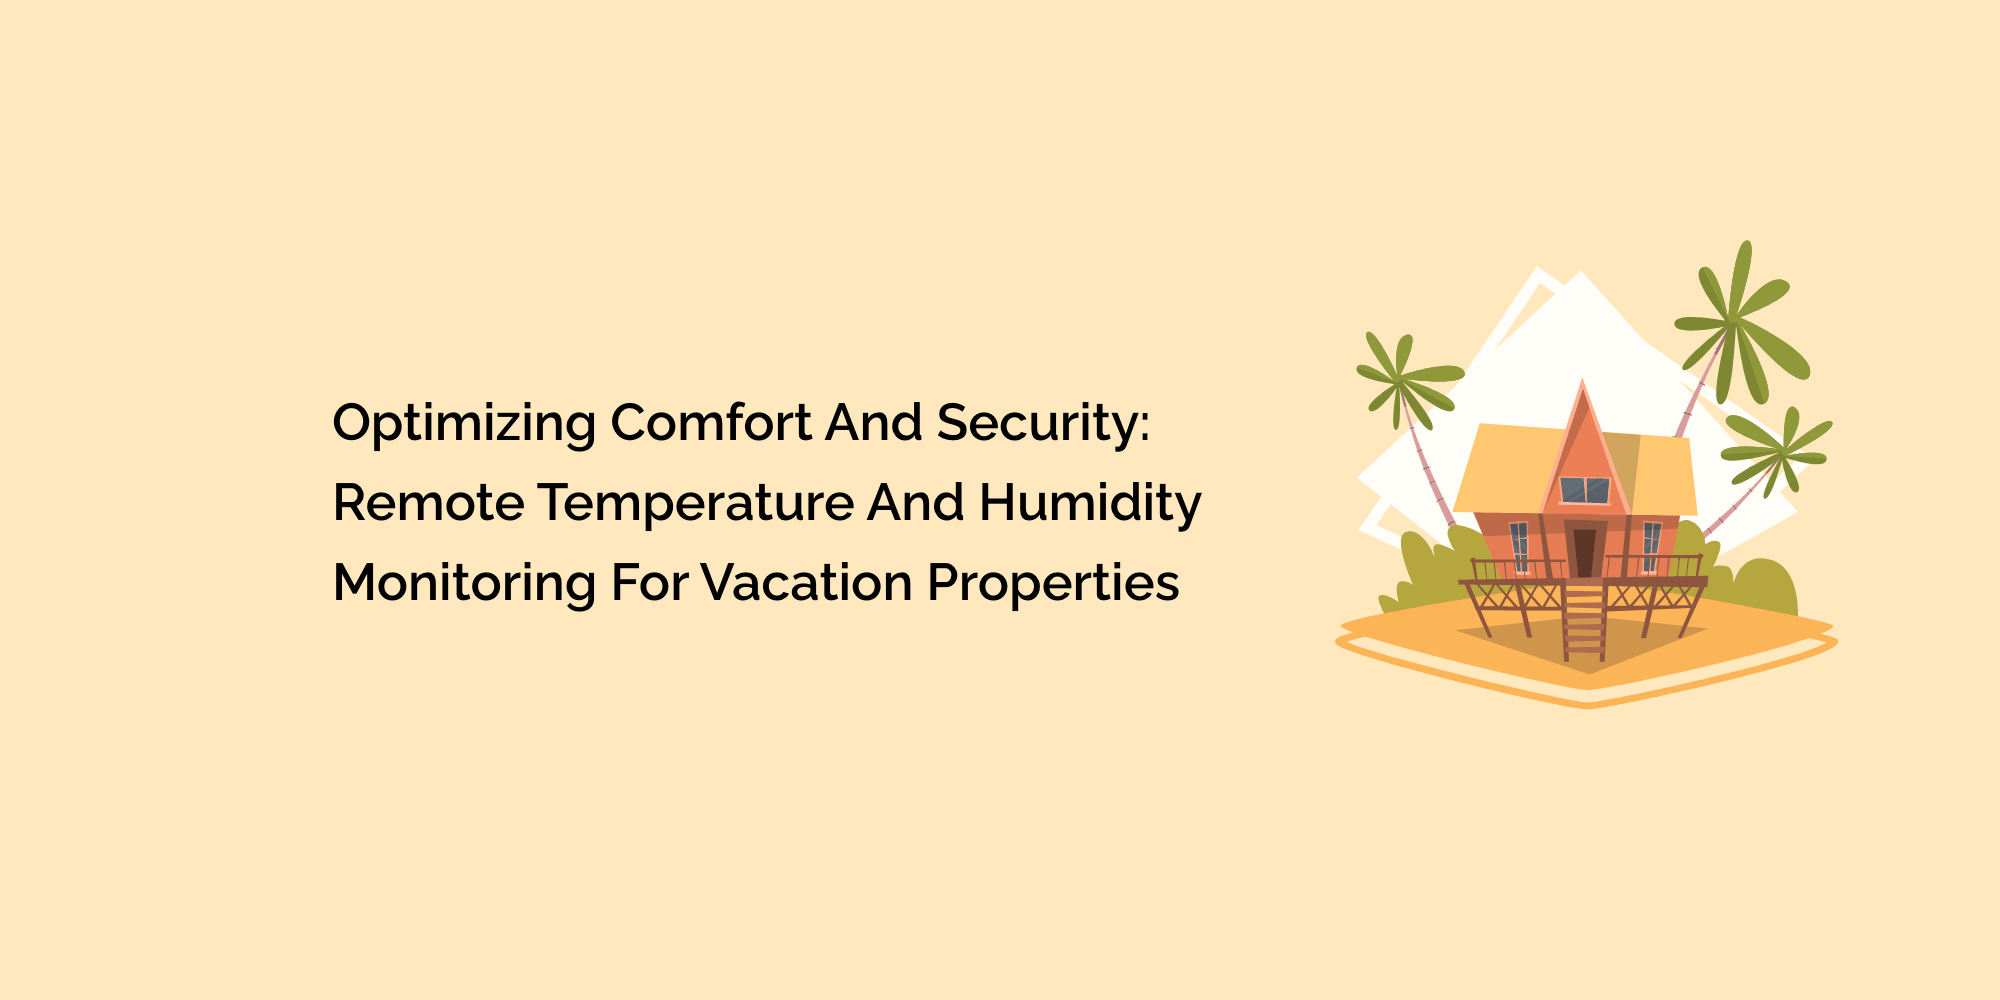 Optimizing Comfort and Security: Remote Temperature and Humidity Monitoring for Vacation Properties